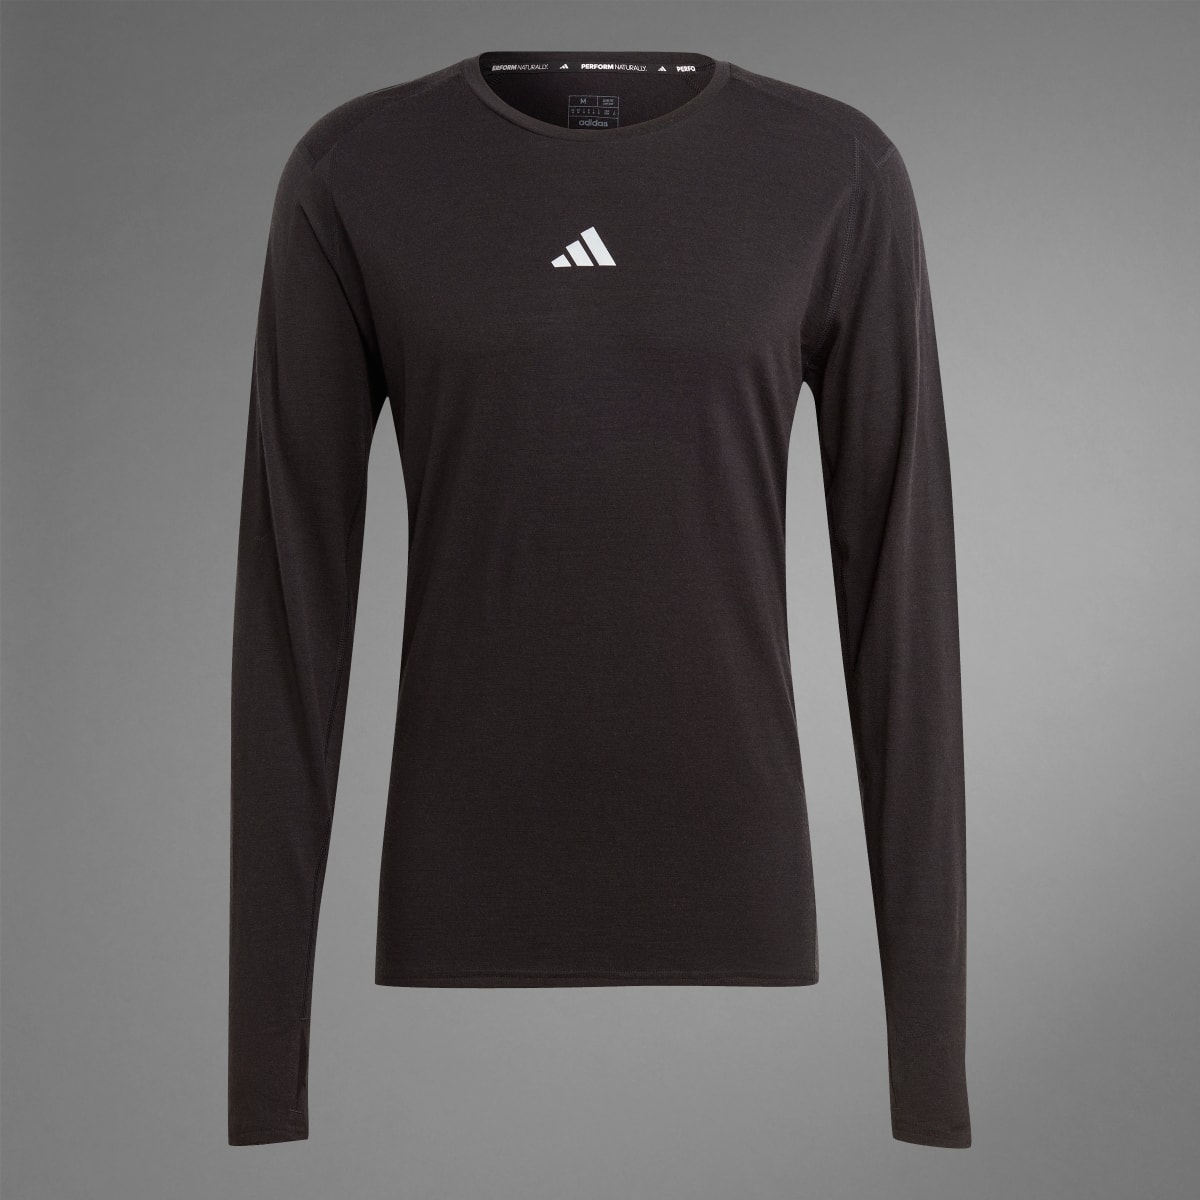 Adidas Ultimate Running Conquer the Elements Merino Longsleeve. 9